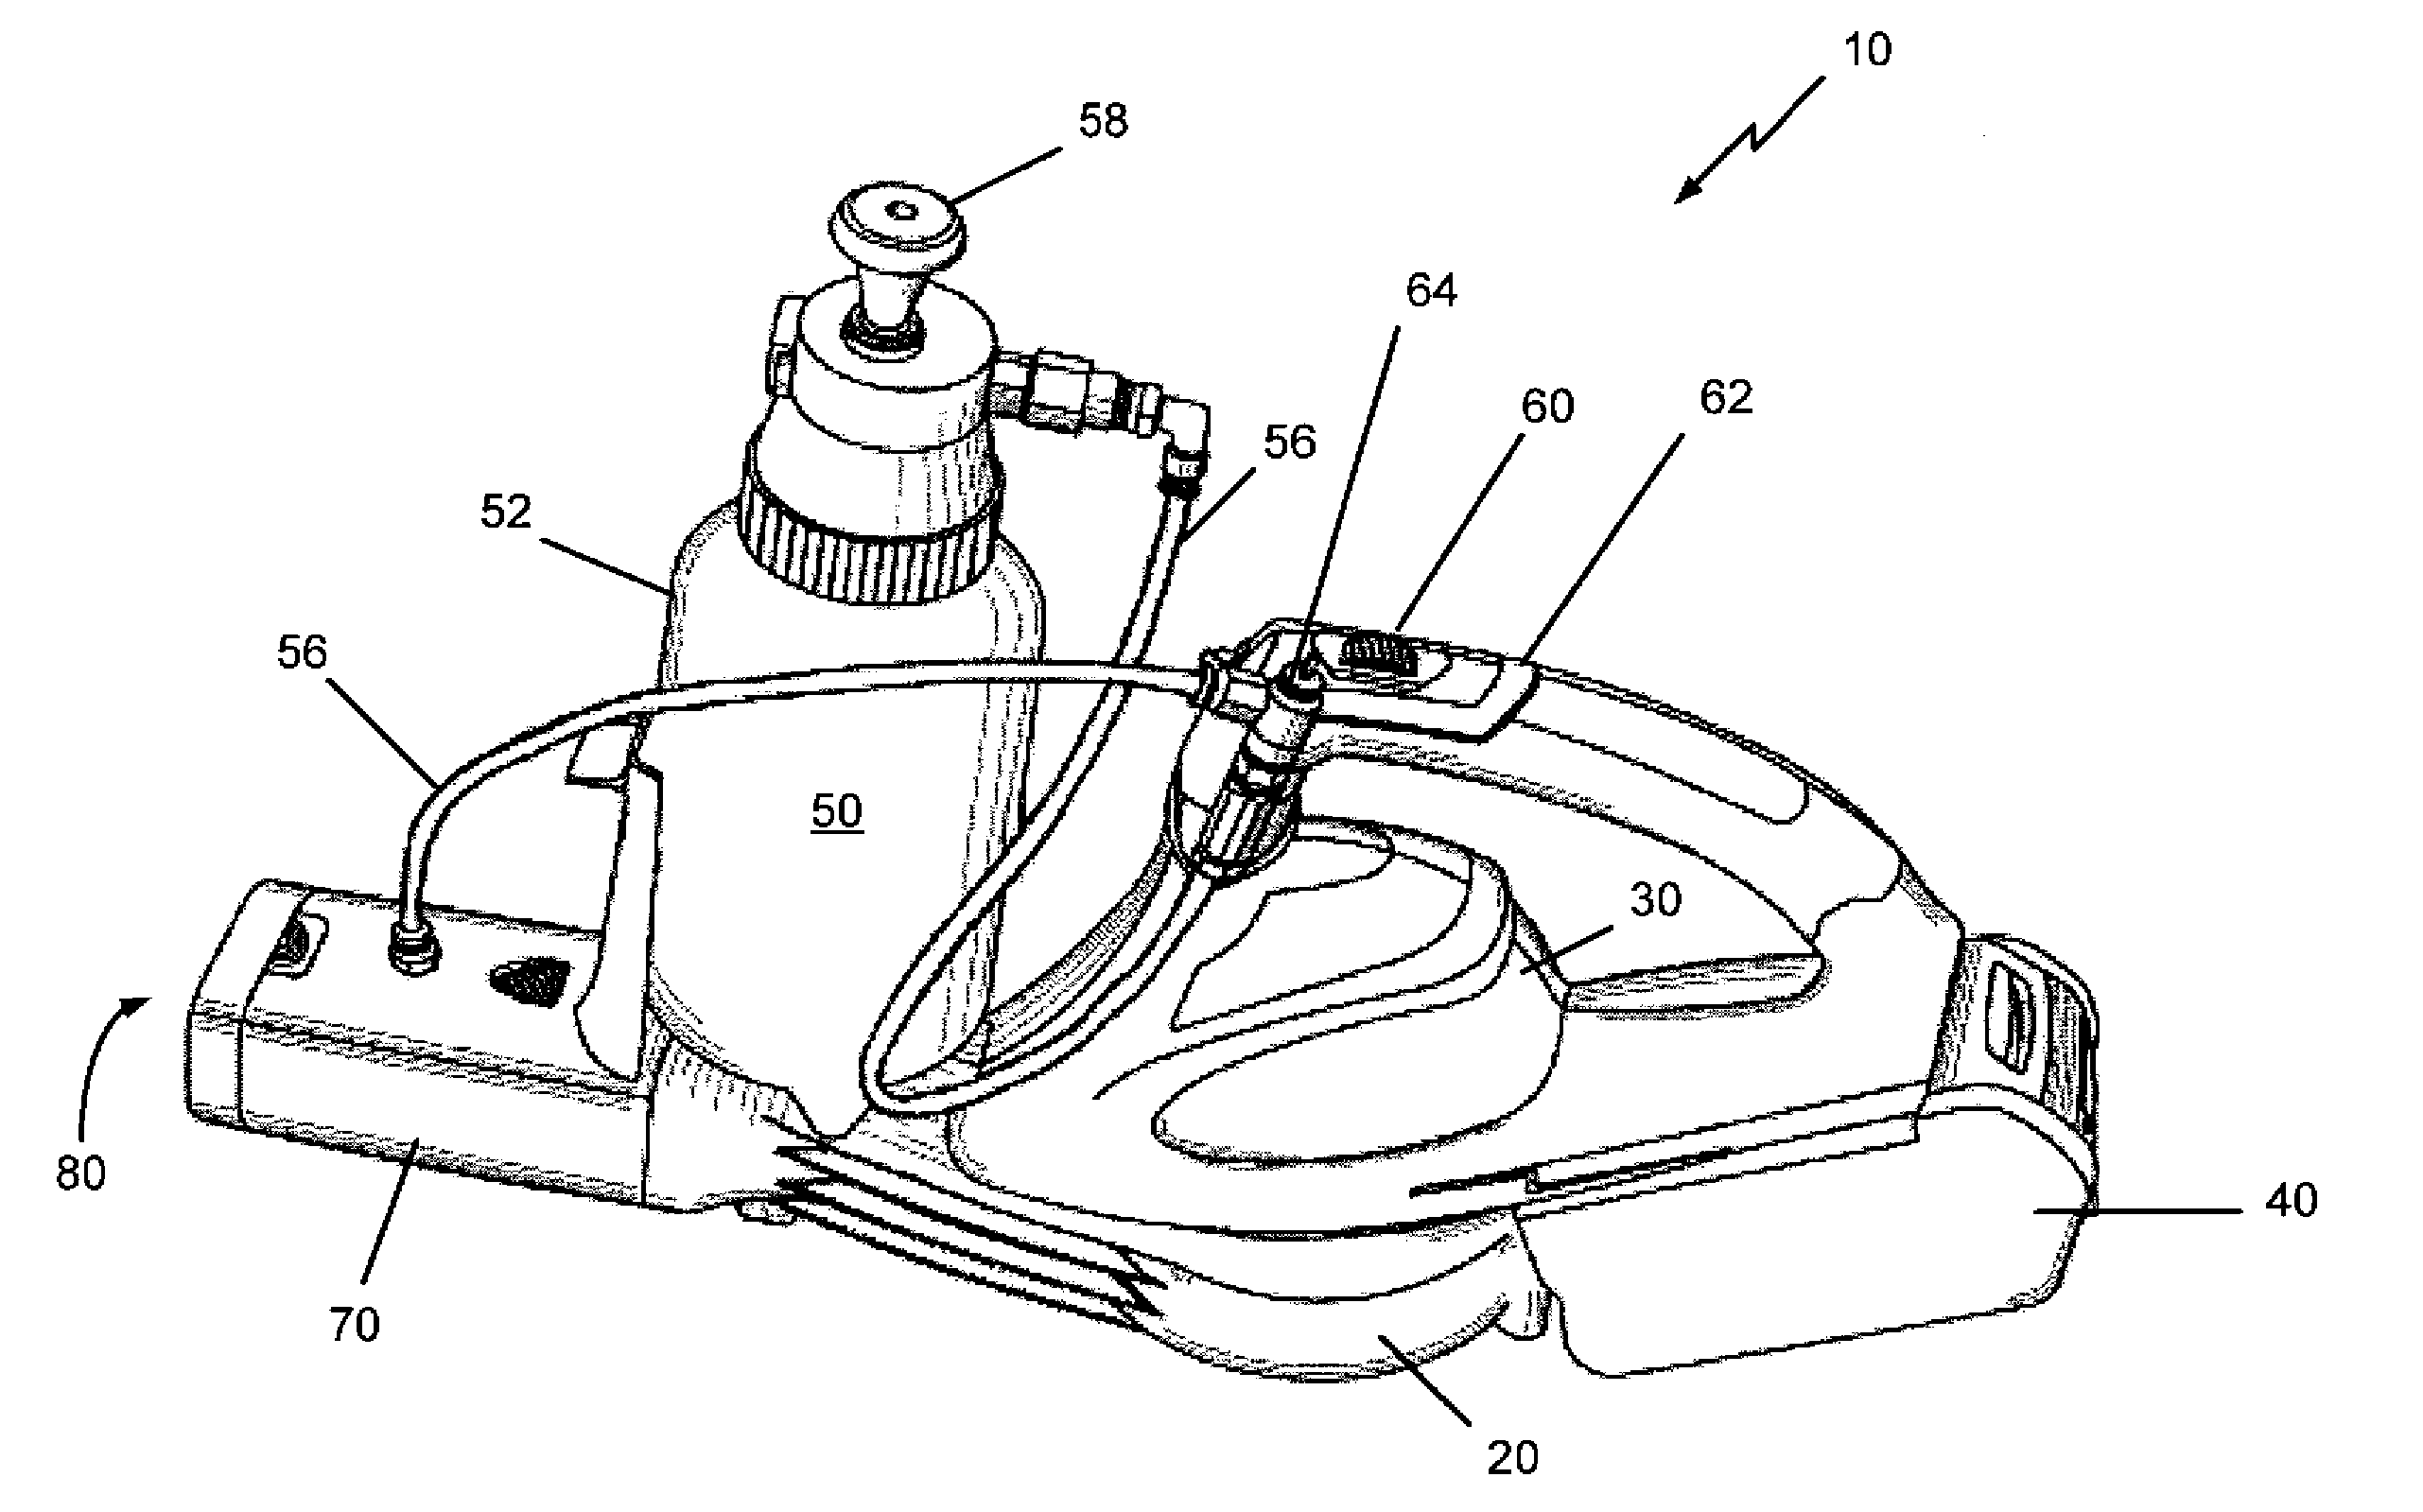 Heatless and cordless fogging/misting apparatus having a low CFM DC-powered blower motor and a mixing chamber for ultra-low volume atomized fog